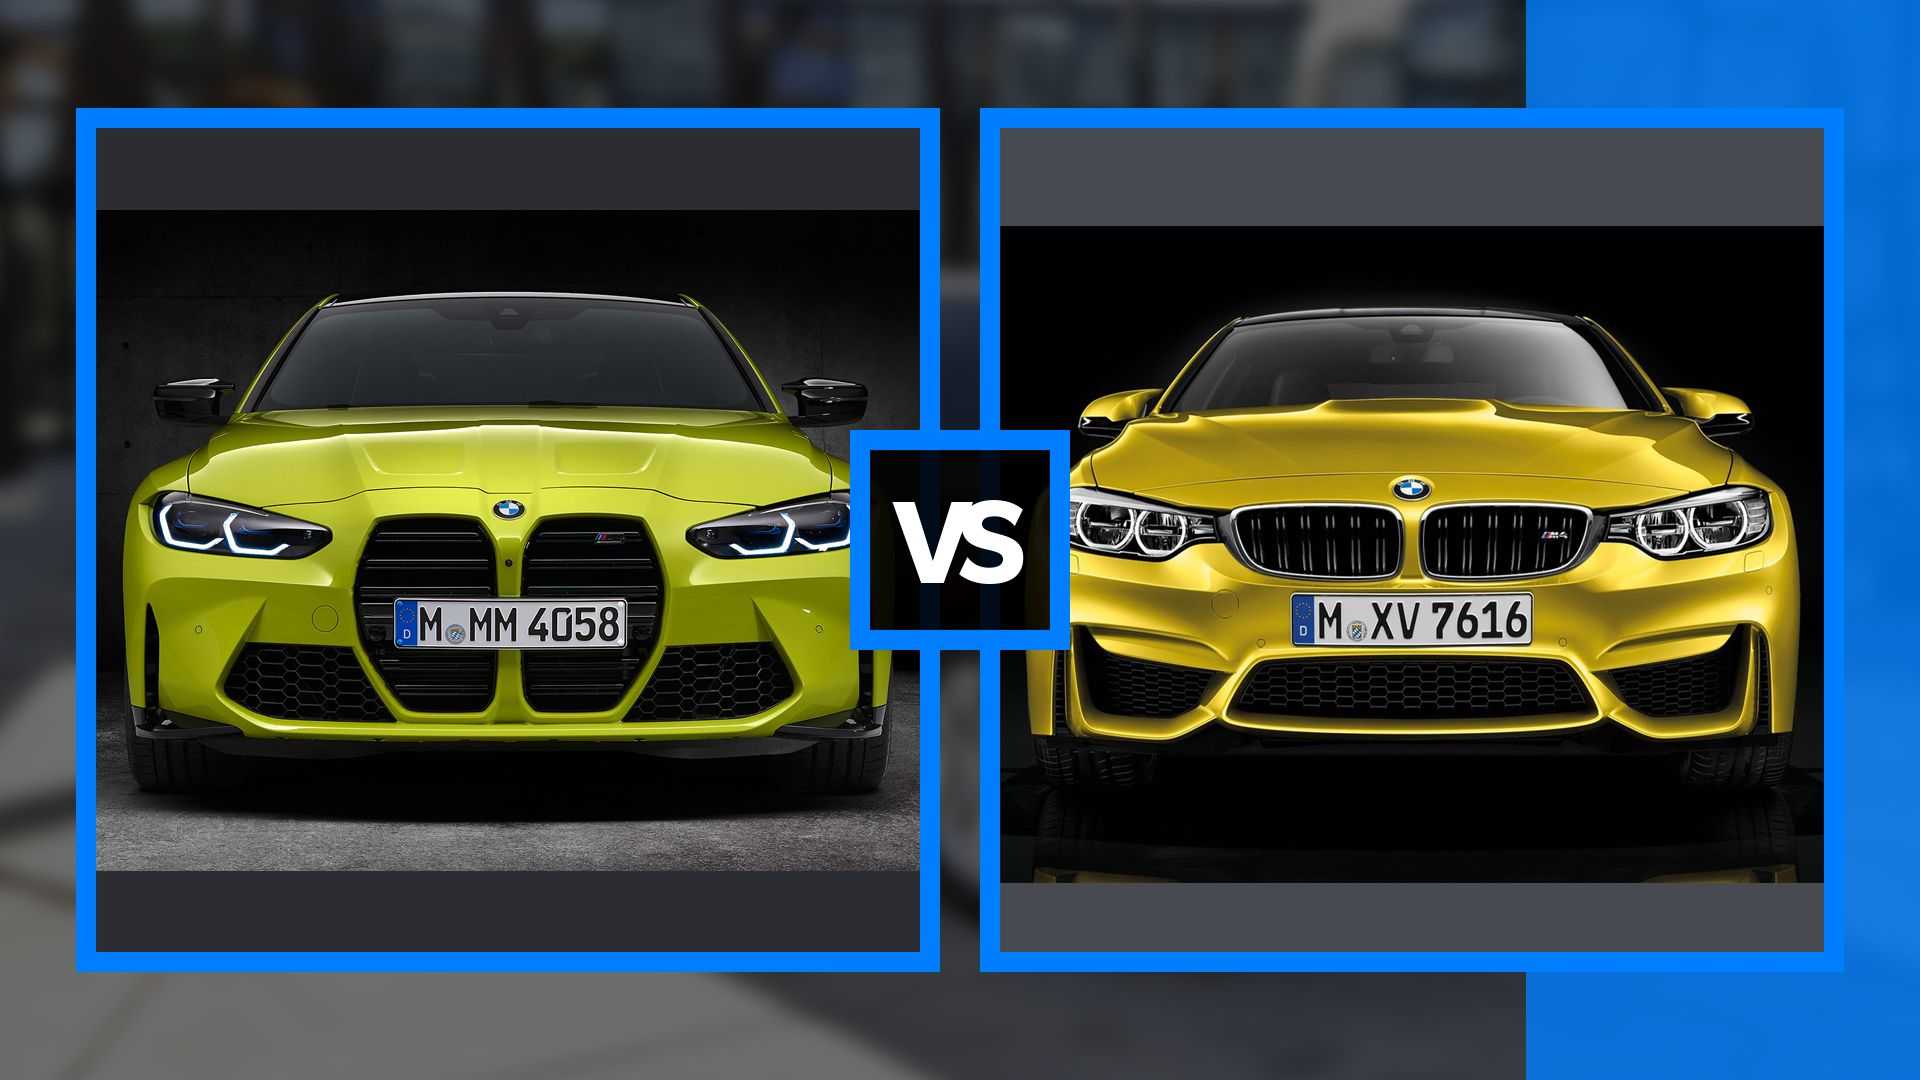 Download 2021 BMW M4 vs 2020 BMW M4: How do they compare visually?